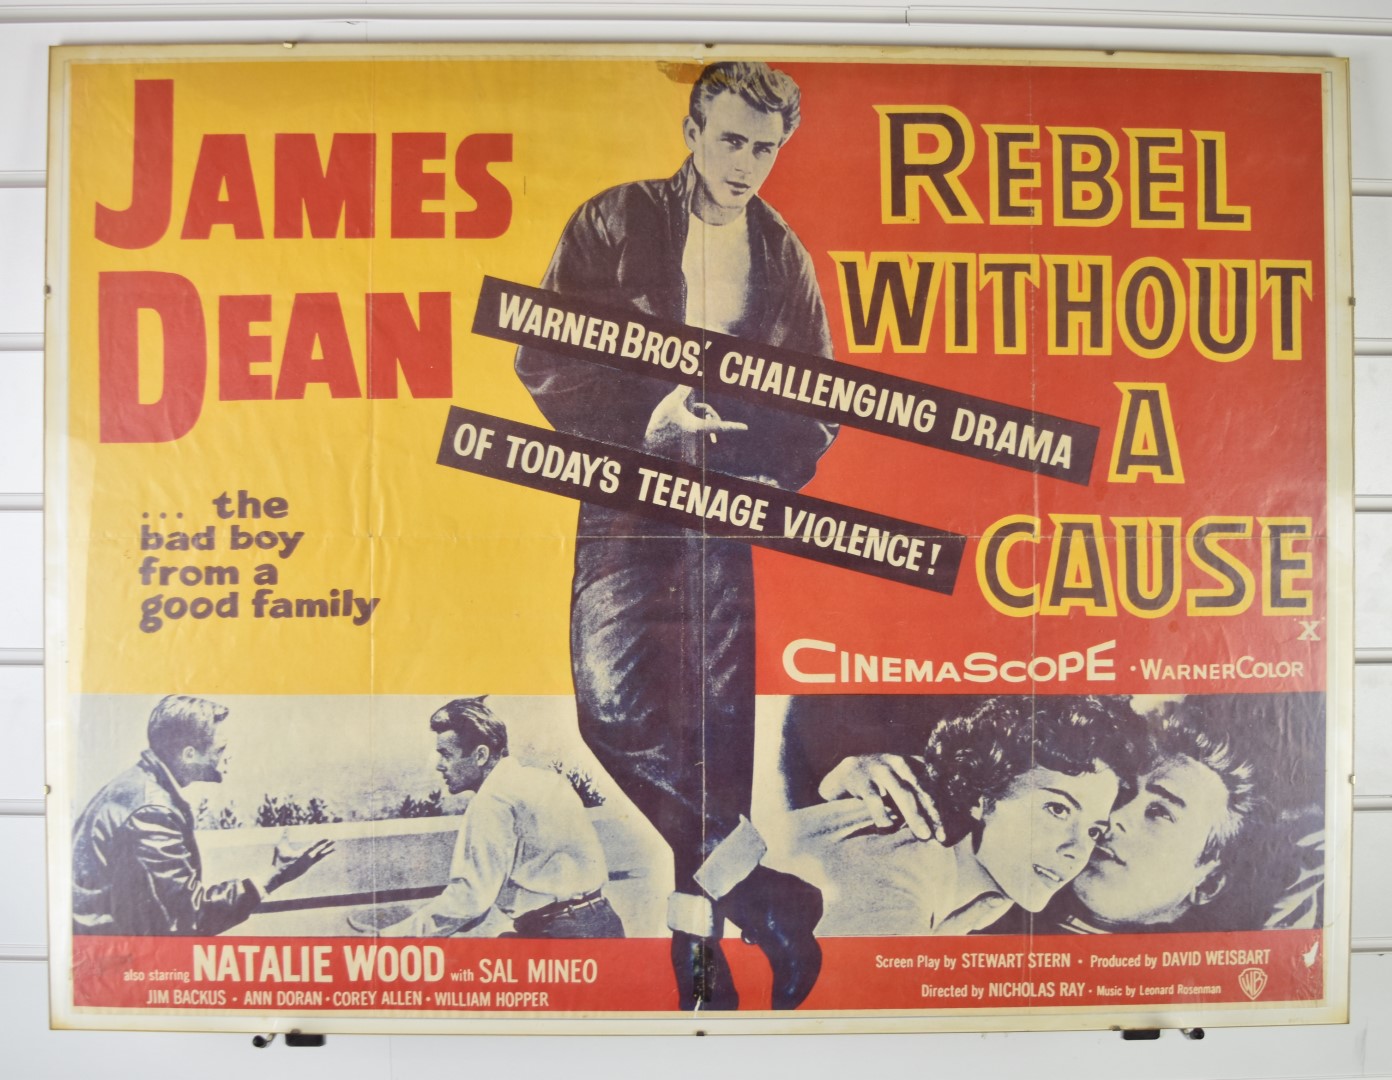 James Dean 'Rebel Without A Cause' film poster, 58 x 78cm, in clip frame